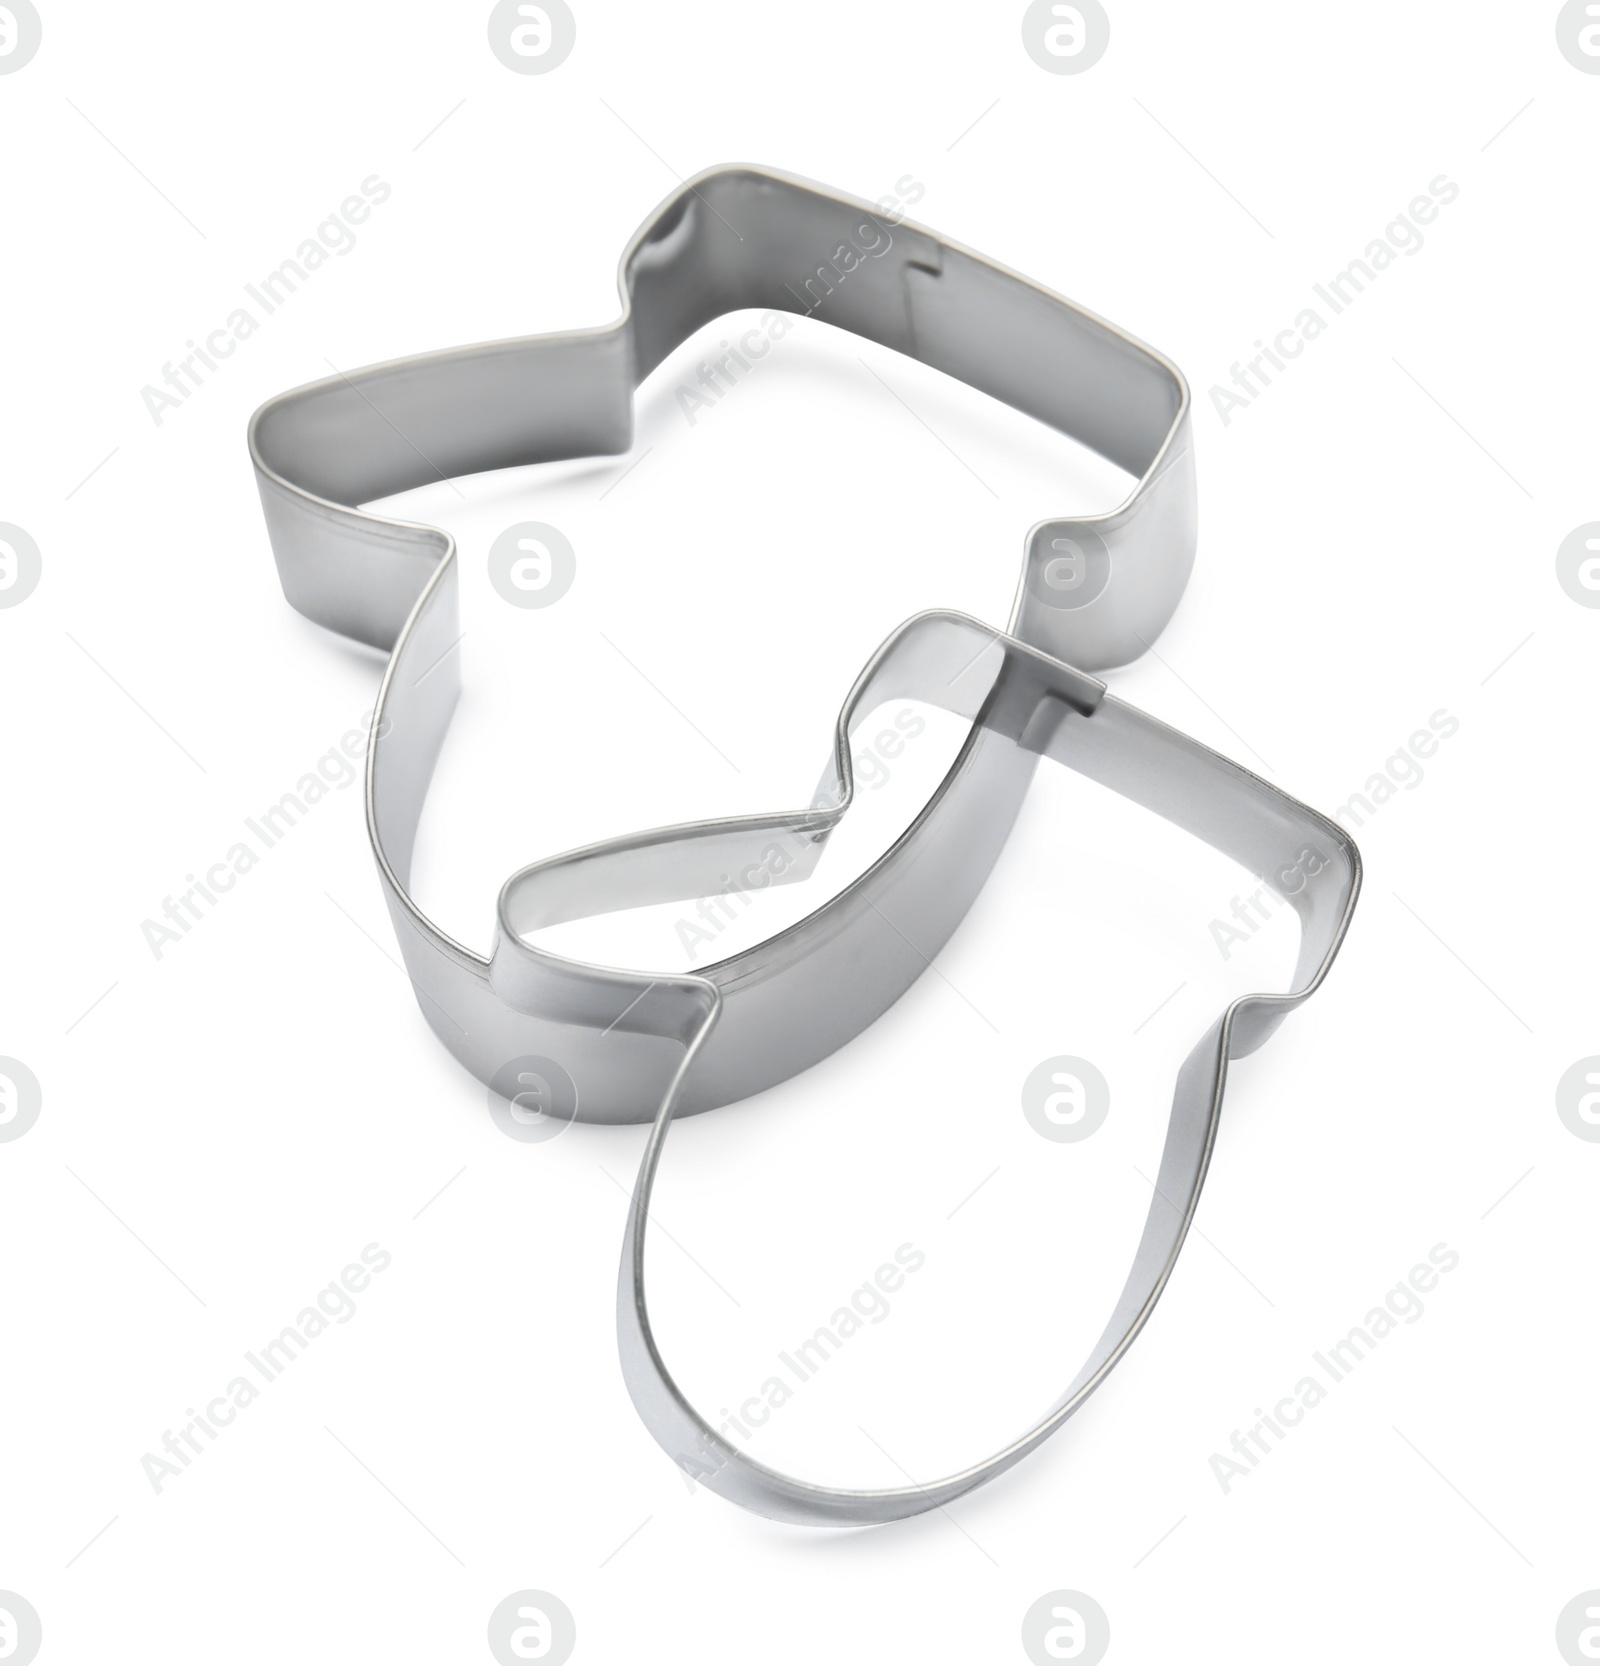 Photo of Mitten shaped cookie cutters on white background